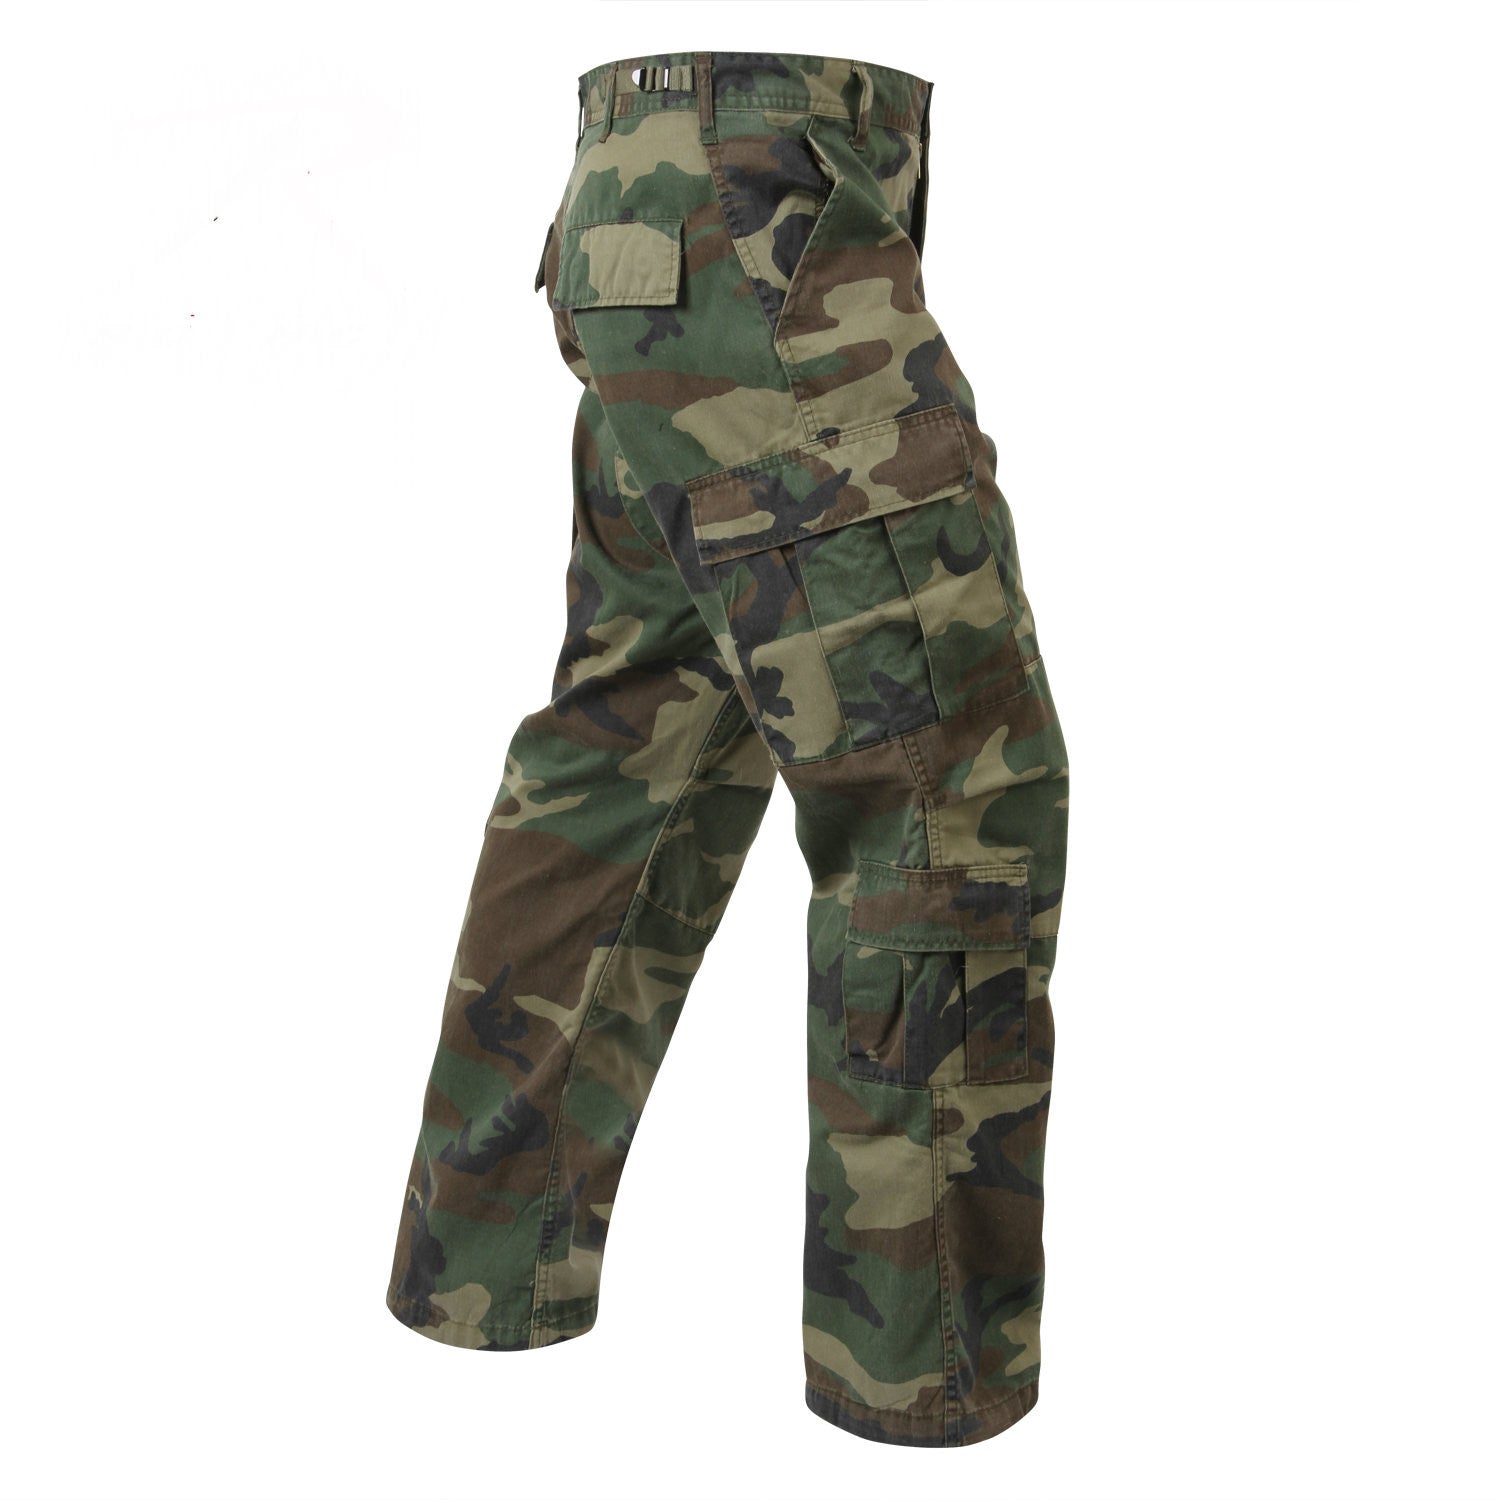 Vintage Paratrooper Fatigue Pants Woodland Camouflage - Army Navy Gear